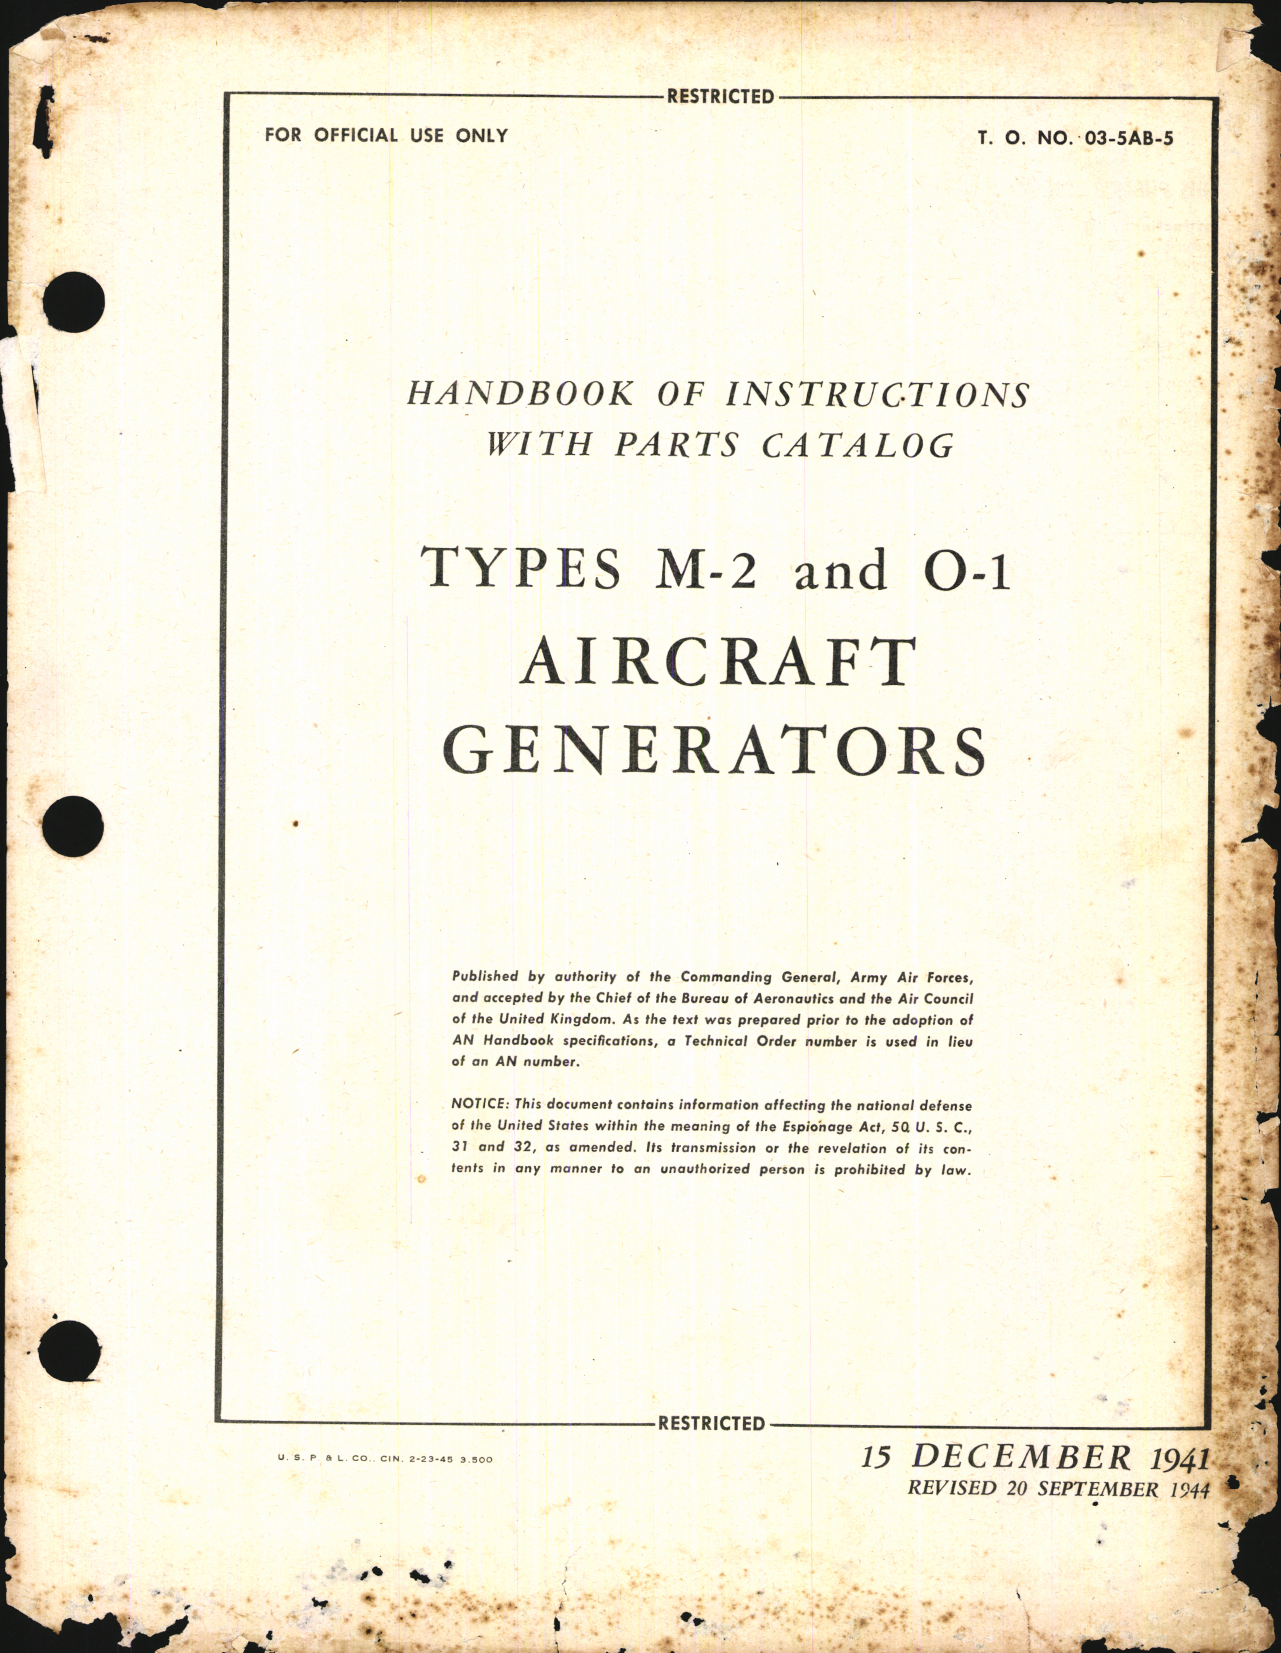 Sample page 1 from AirCorps Library document: Handbook of Instructions with Parts Catalog for Types M-2 and O-1 Aircraft Generators